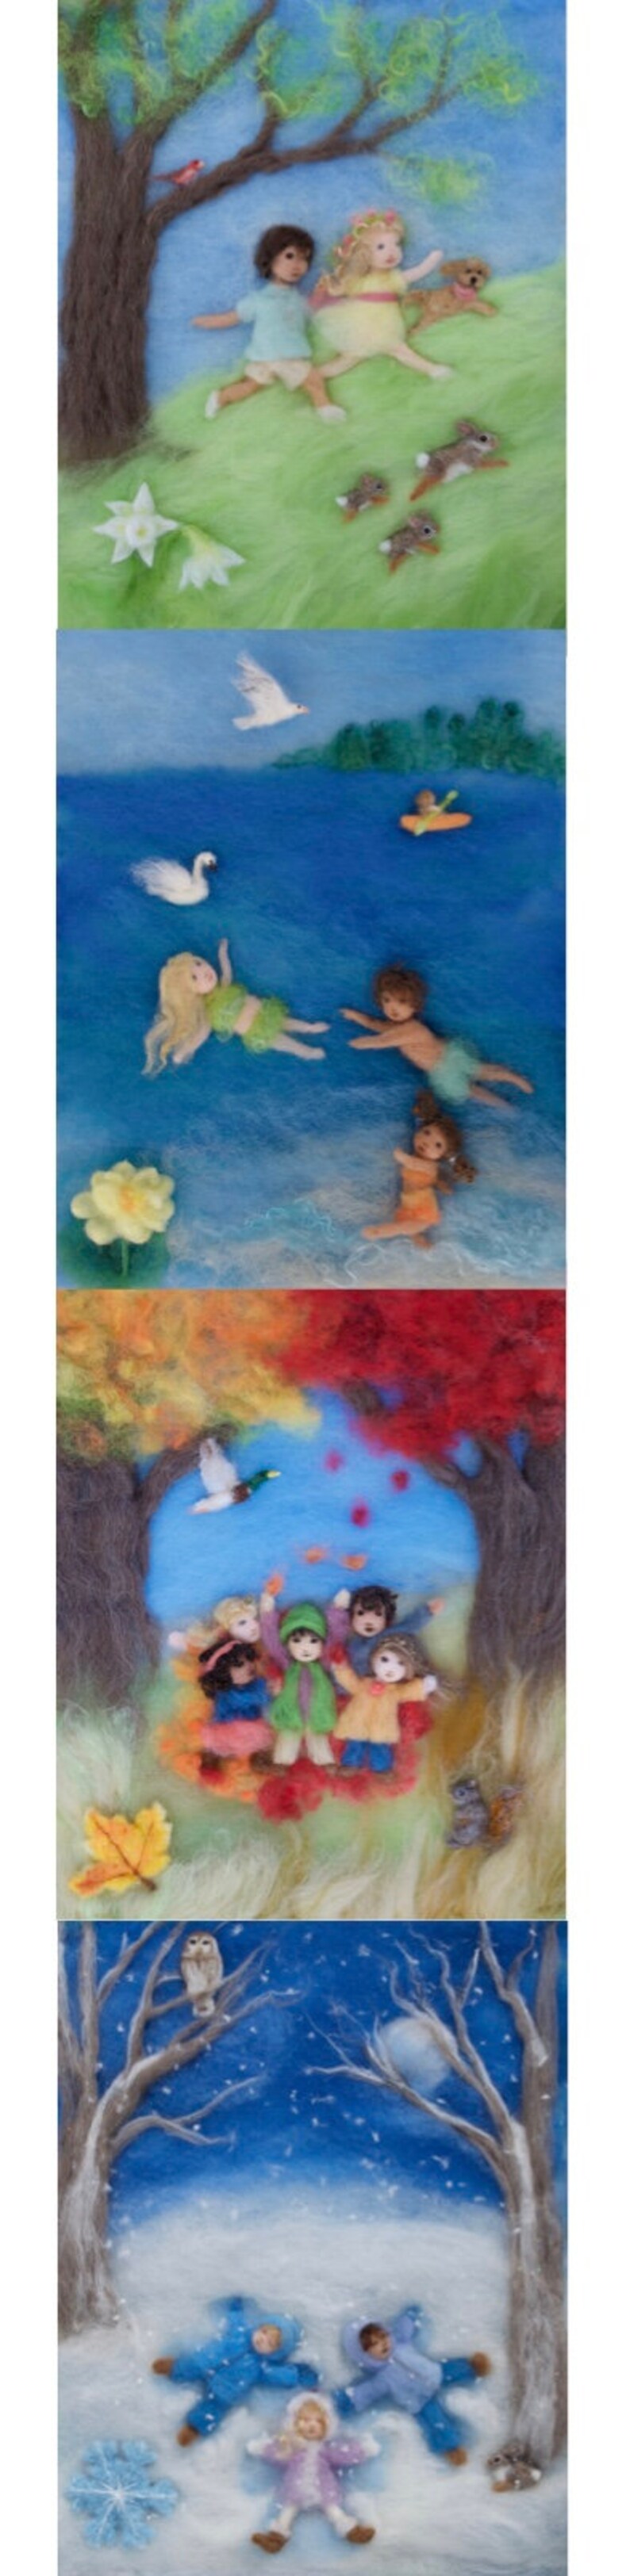 Seasons of Joy, Wool Painting Photo Print of Picture Book Illustrations, Set of 4, 5 by 7 image 6